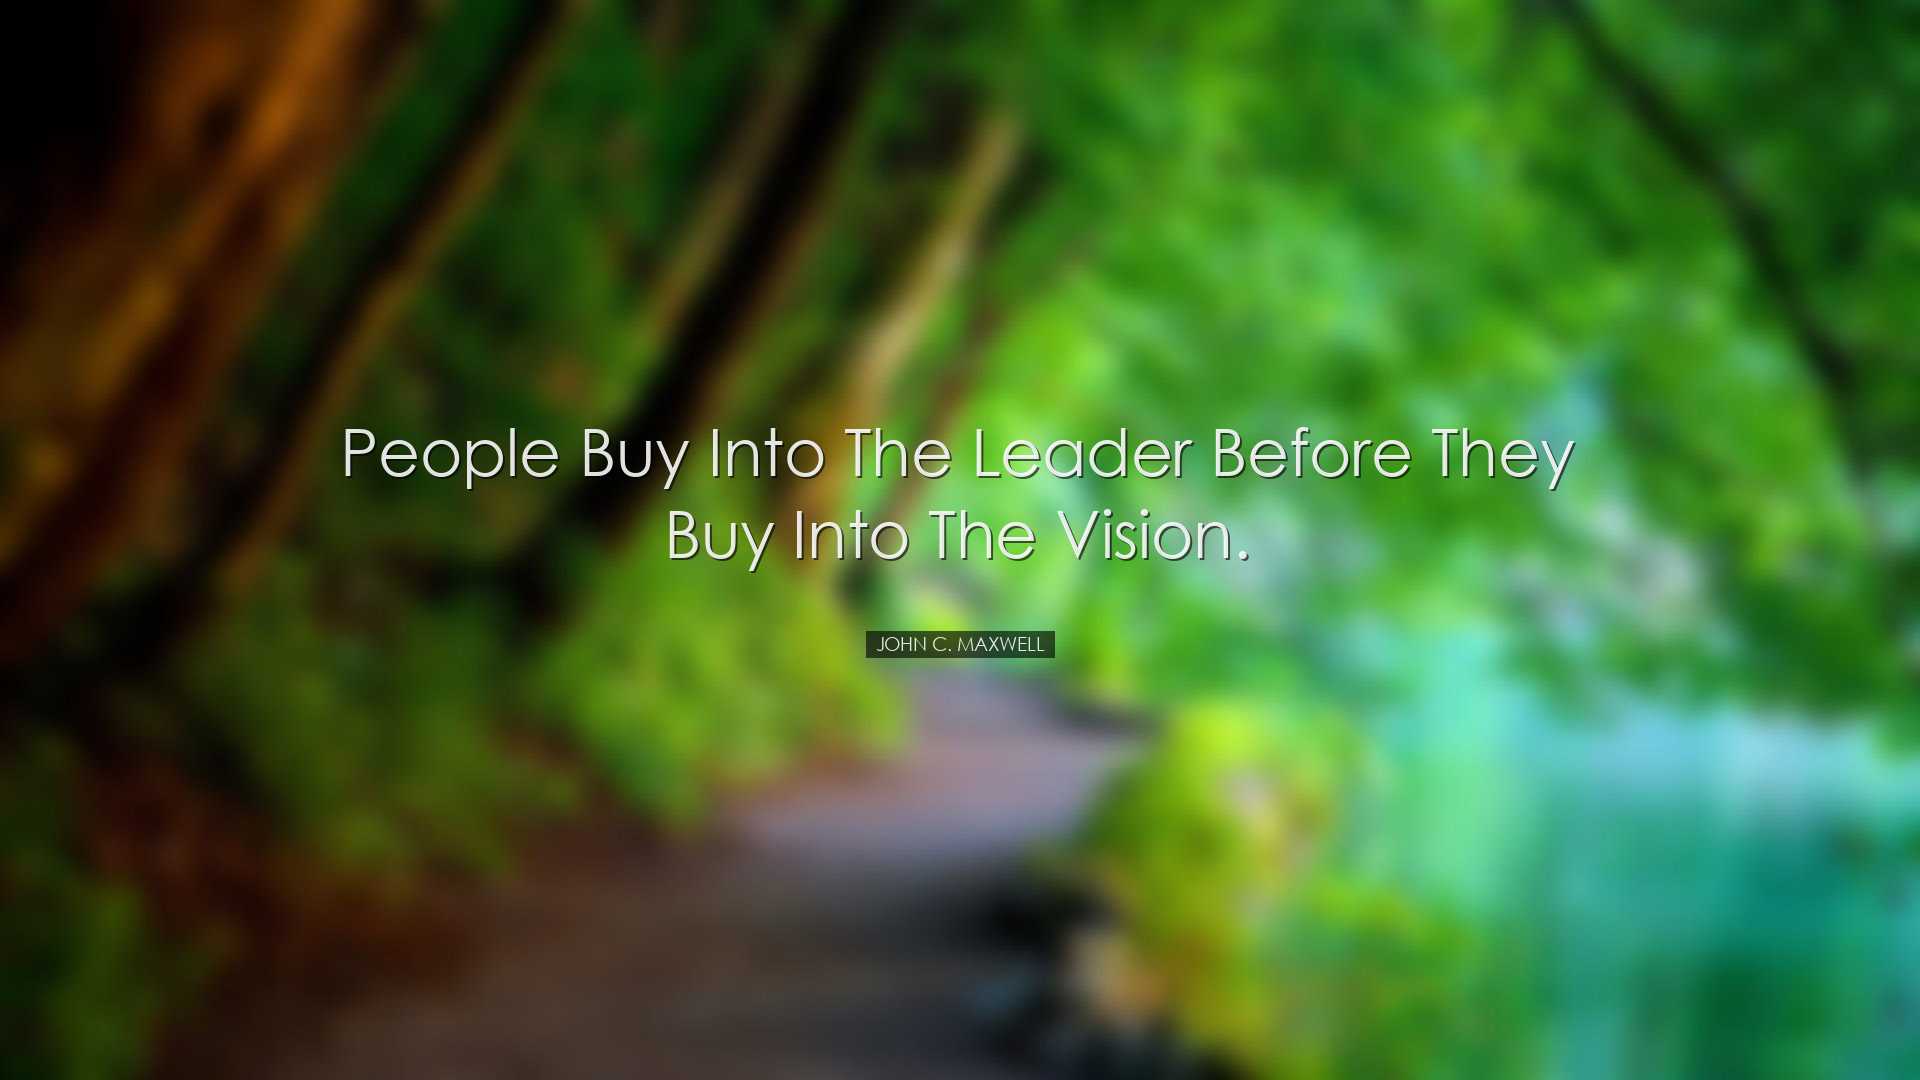 People buy into the leader before they buy into the vision. - John